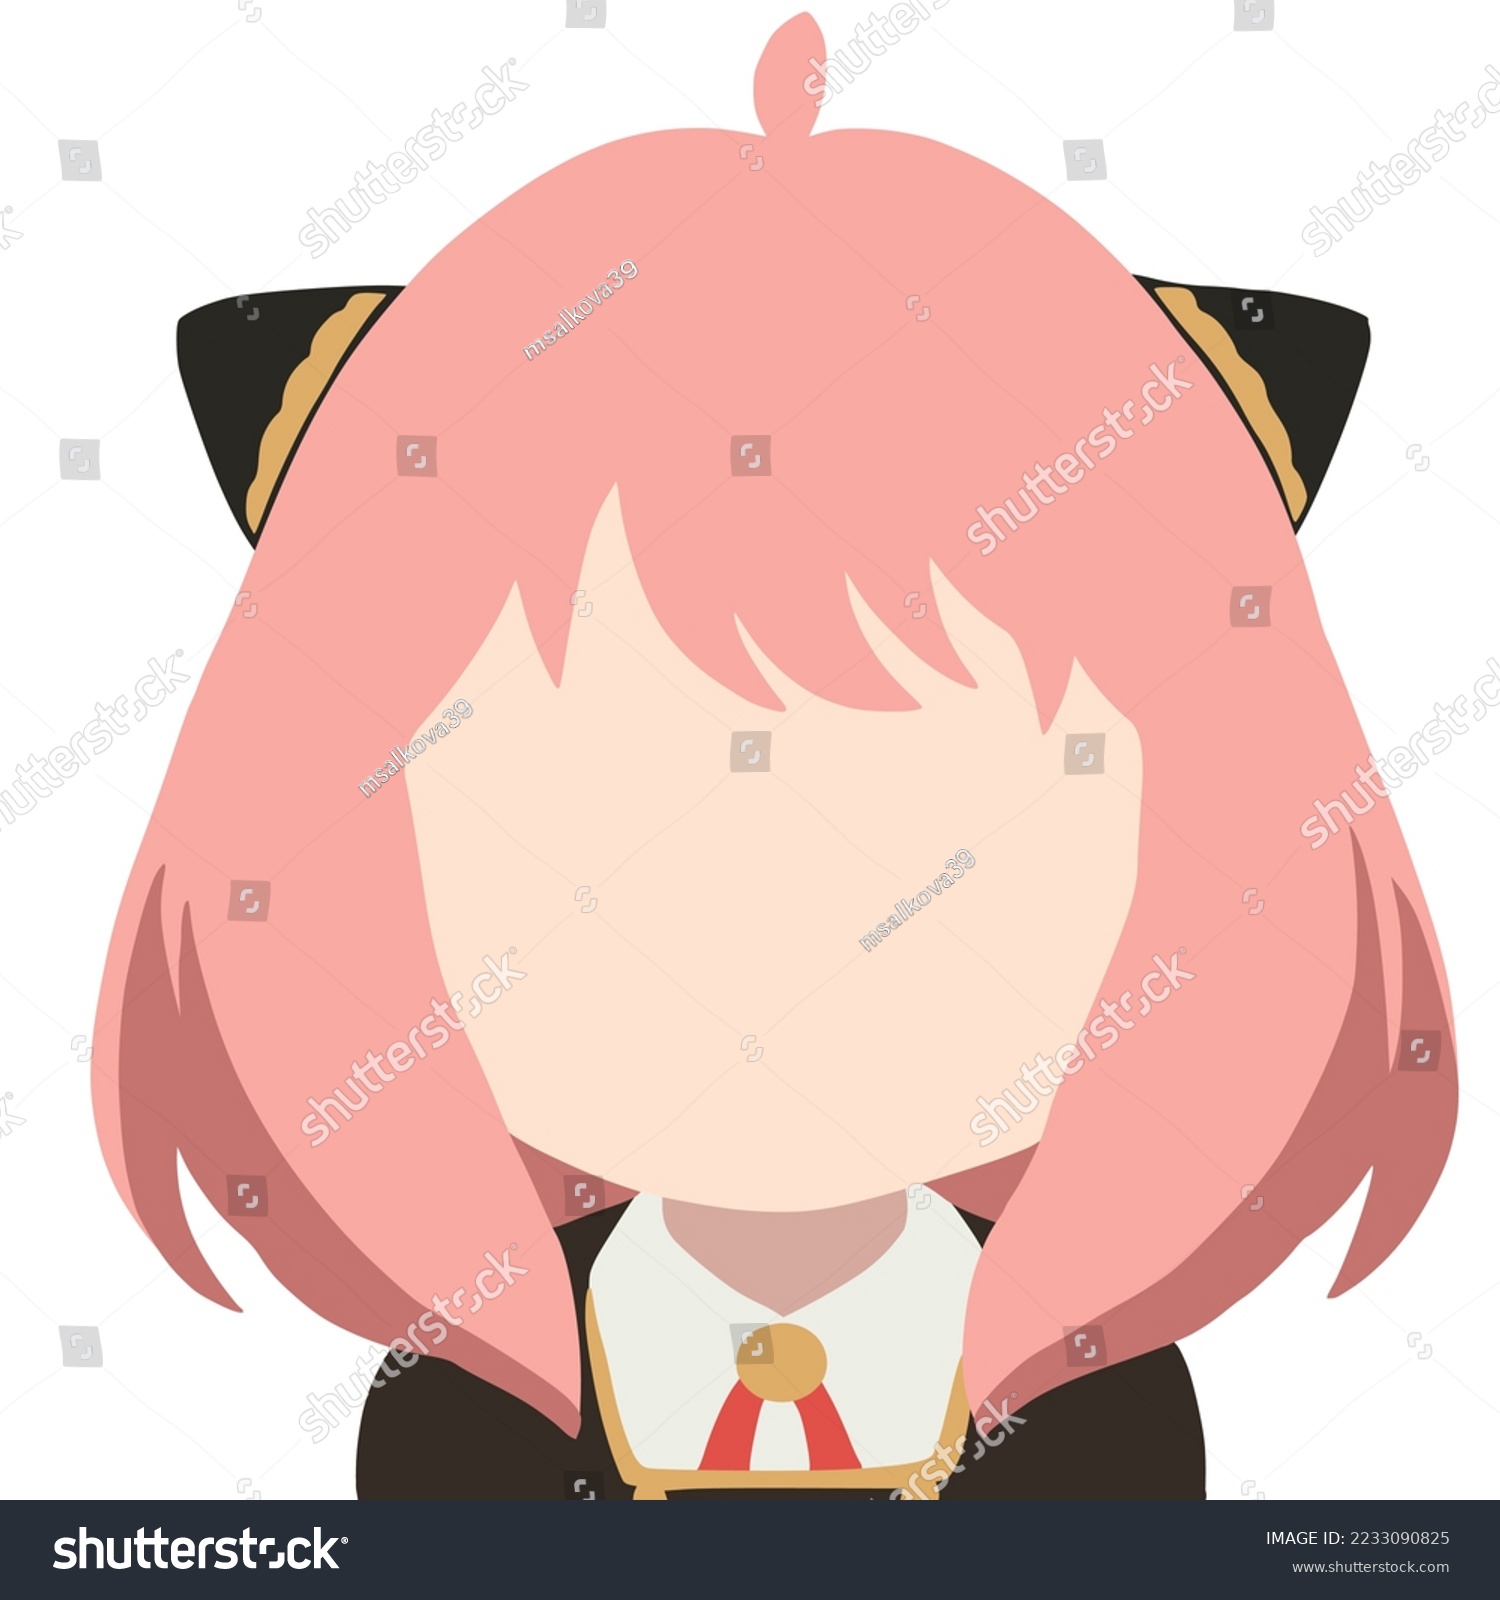 SVG of A girl with ears and lush pink hair, a black school dress with a red bow and a gold brooch, a simple drawing without drawing svg